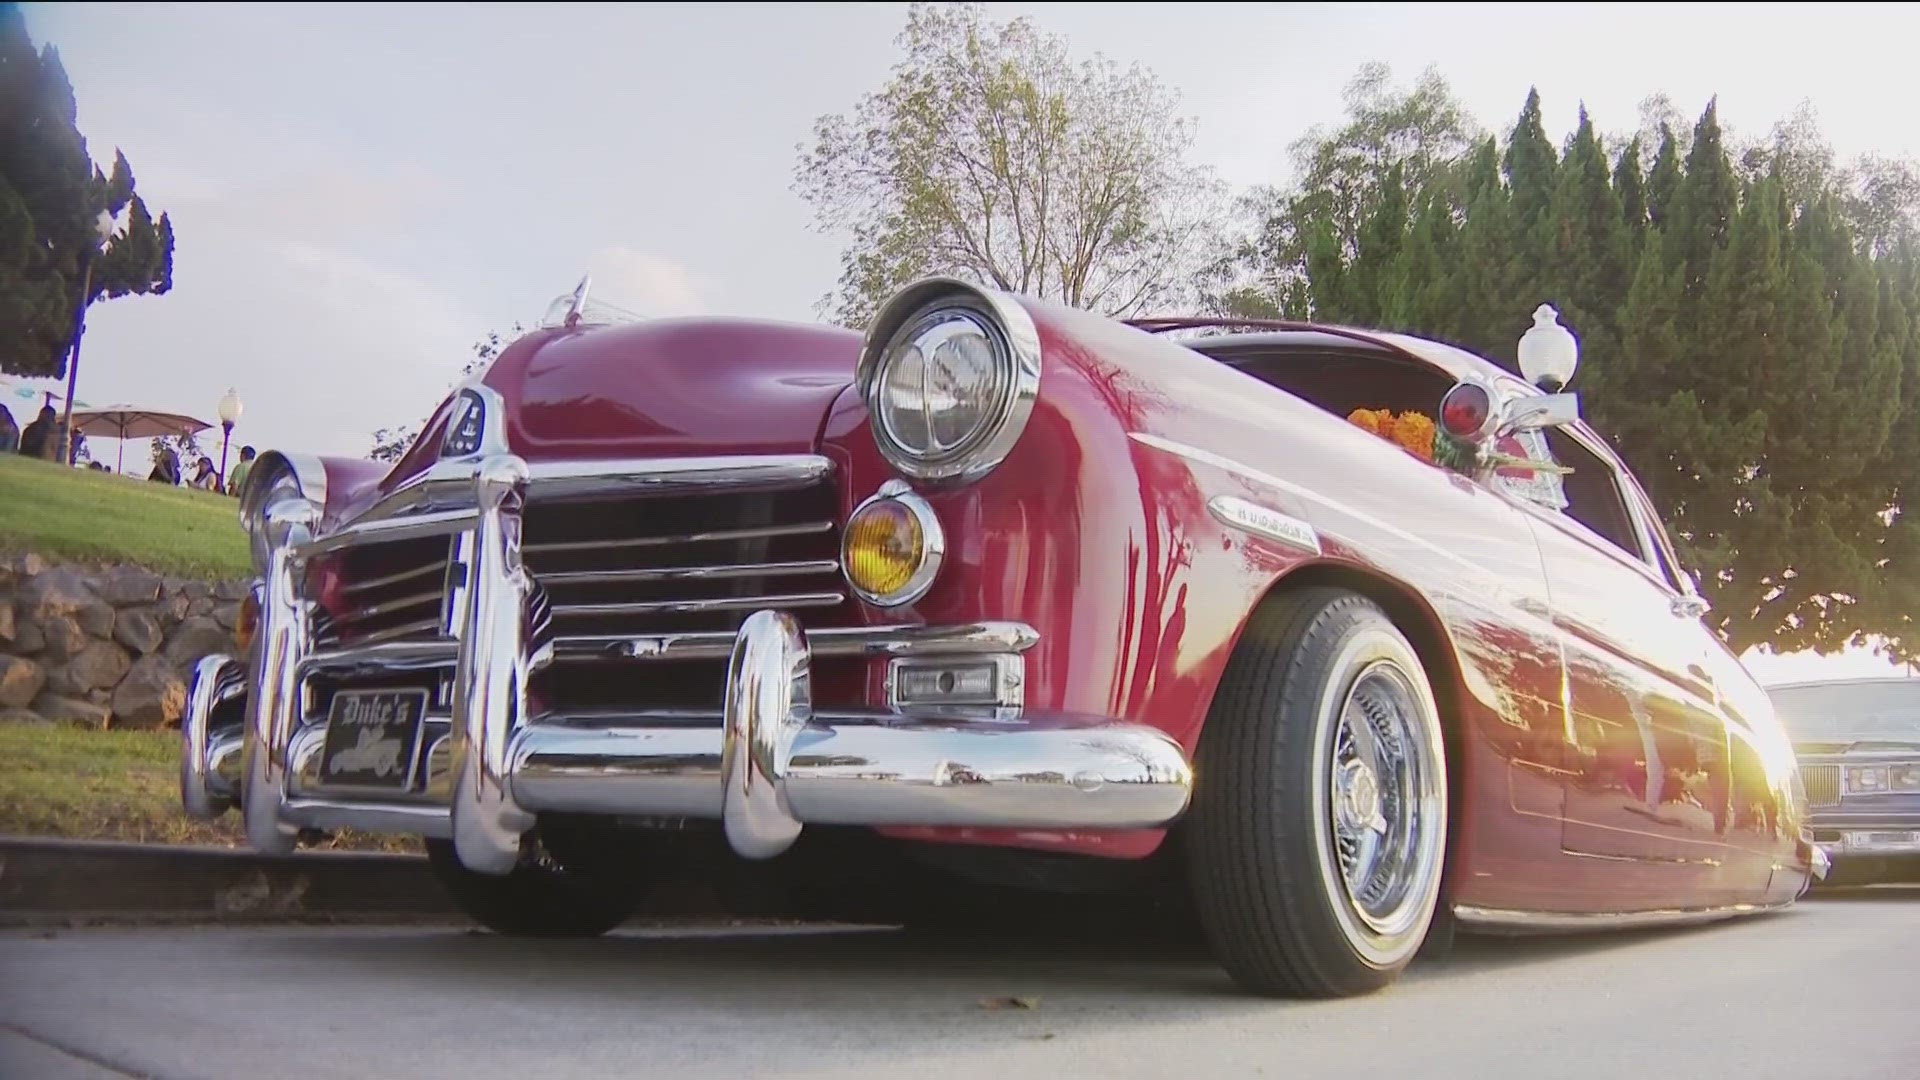 Lowriders in California can now legally cruise the streets, it's a victory for a San Diego coalition that pushed to get Gov. Gavin Newsom to pass the statewide bill.